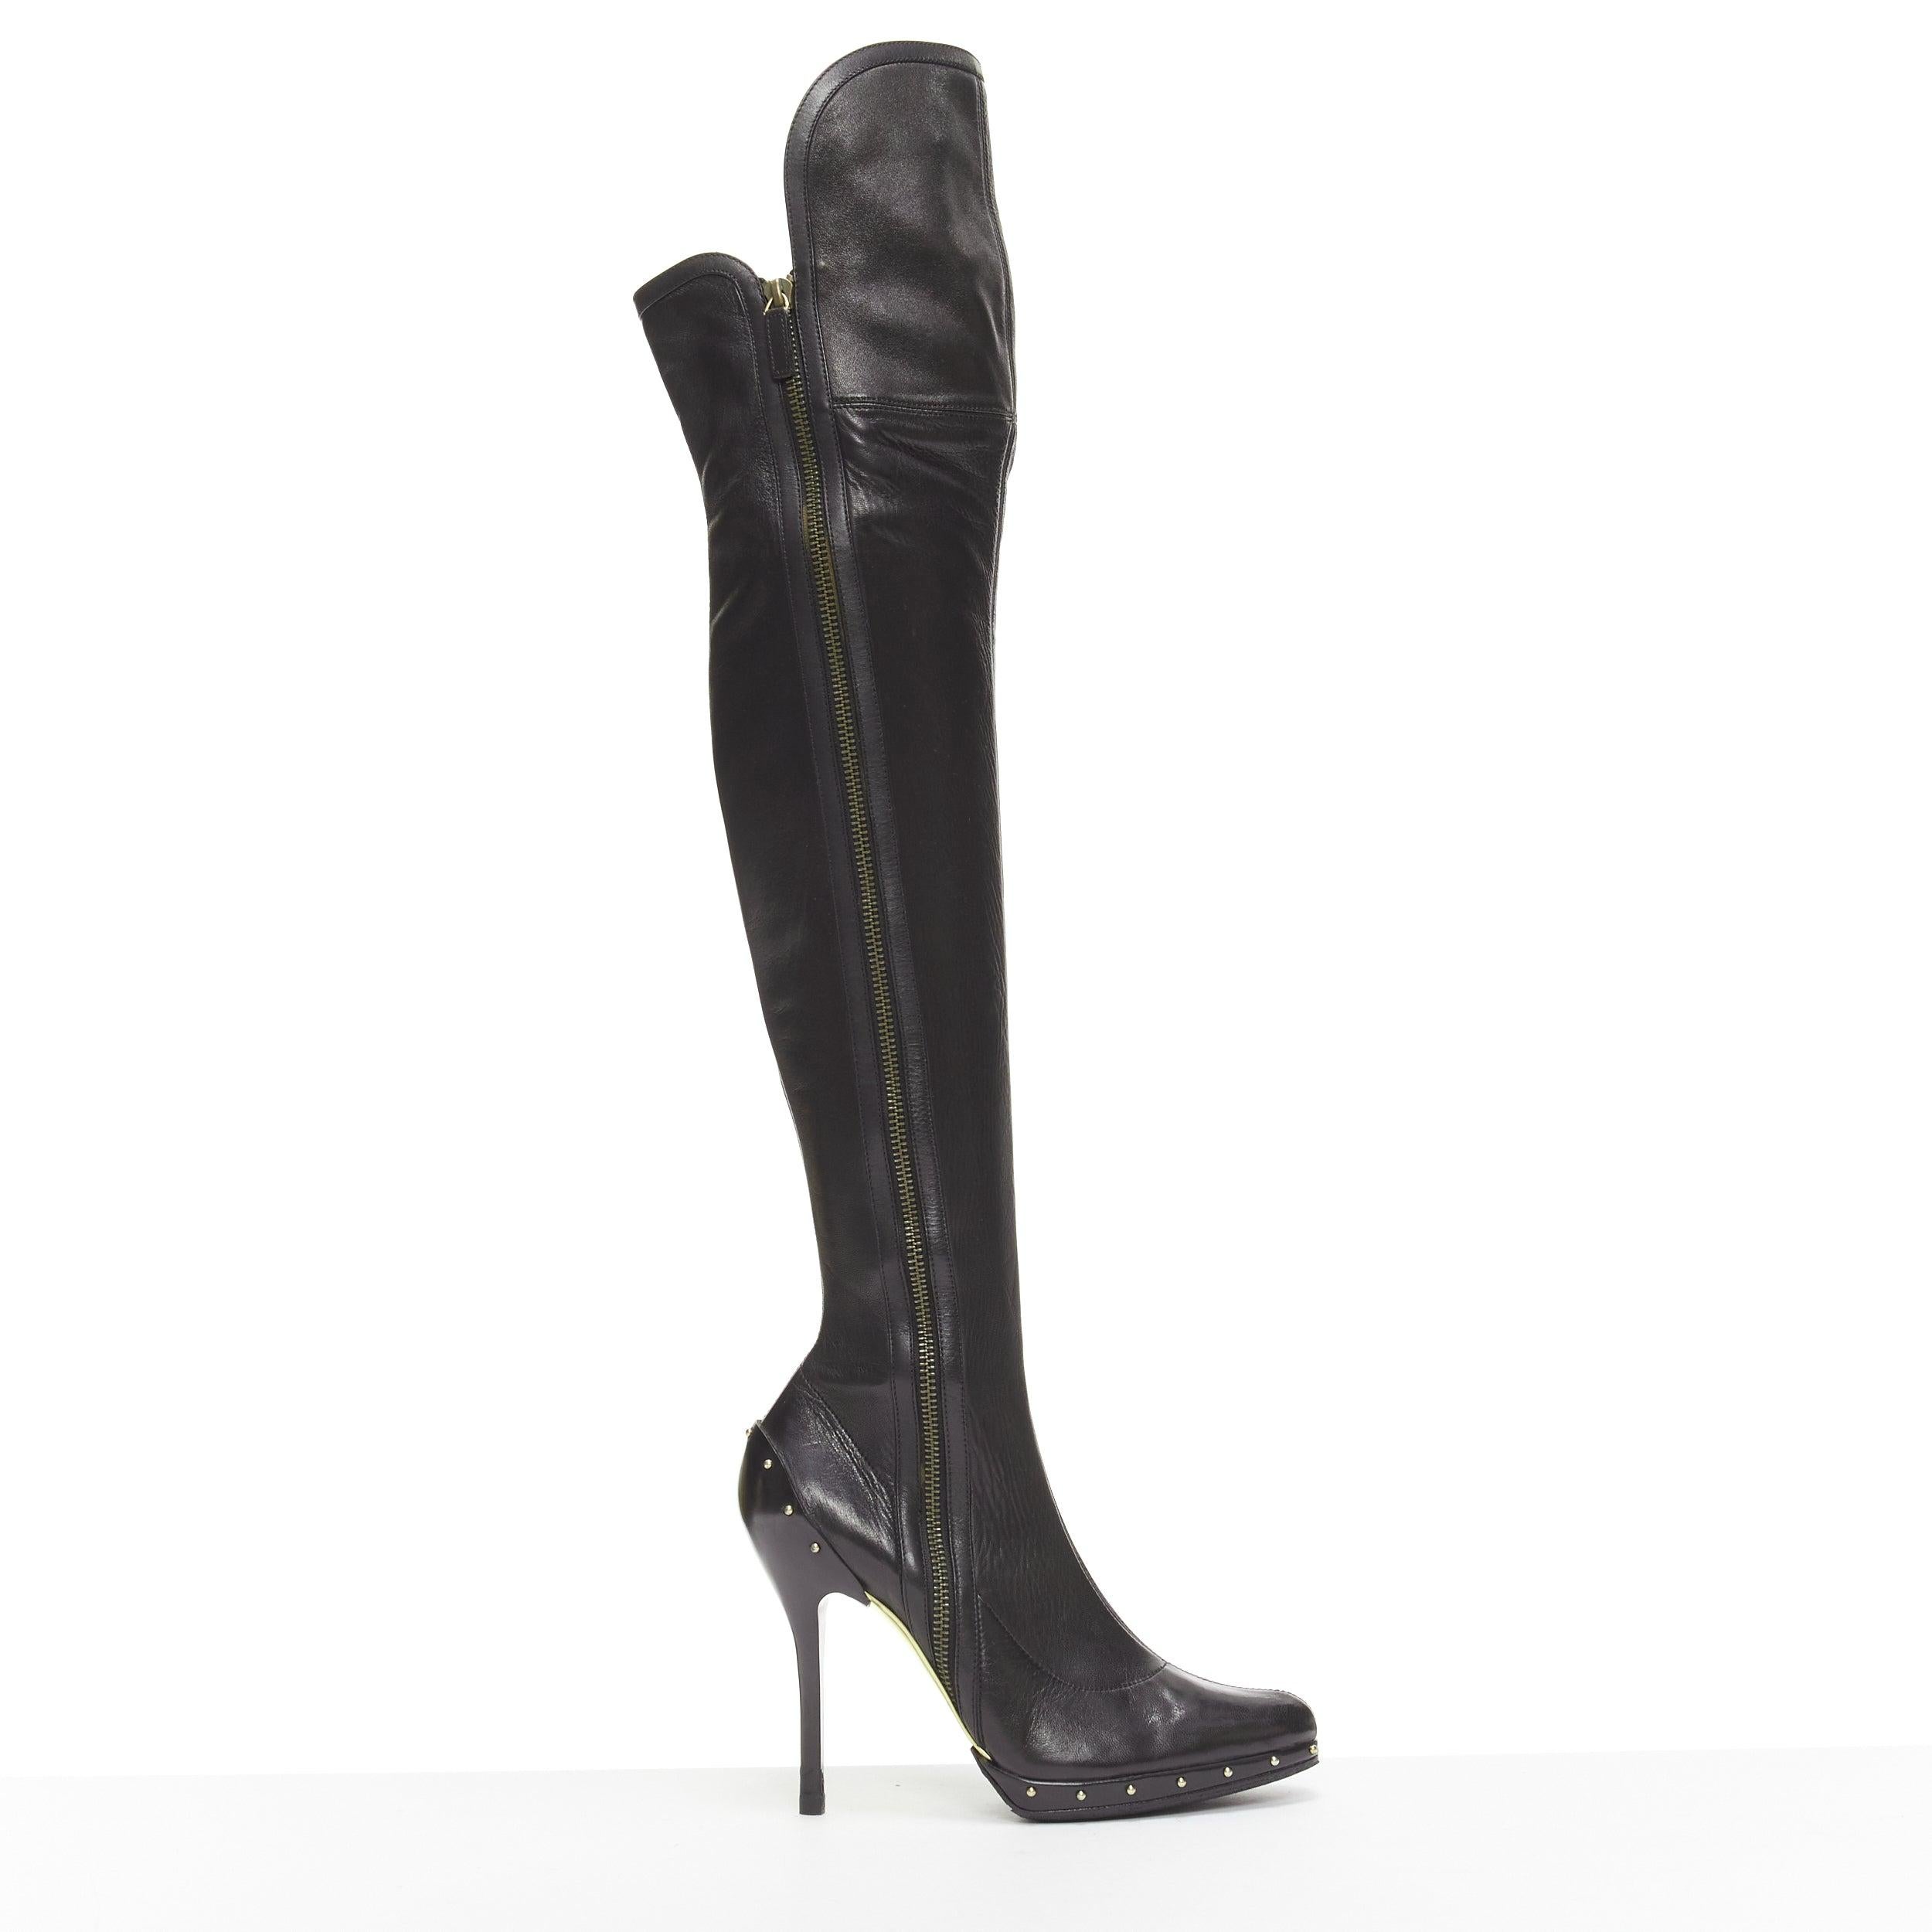 GUCCI TOM FORD 2003 Runway black leather studded thigh high boots EU37
Reference: NKLL/A00229
Brand: Gucci
Designer: Tom Ford
Collection: 2003 AW - Runway
Material: Leather
Color: Black, Gold
Pattern: Solid
Closure: Zip
Lining: Black Fabric
Extra